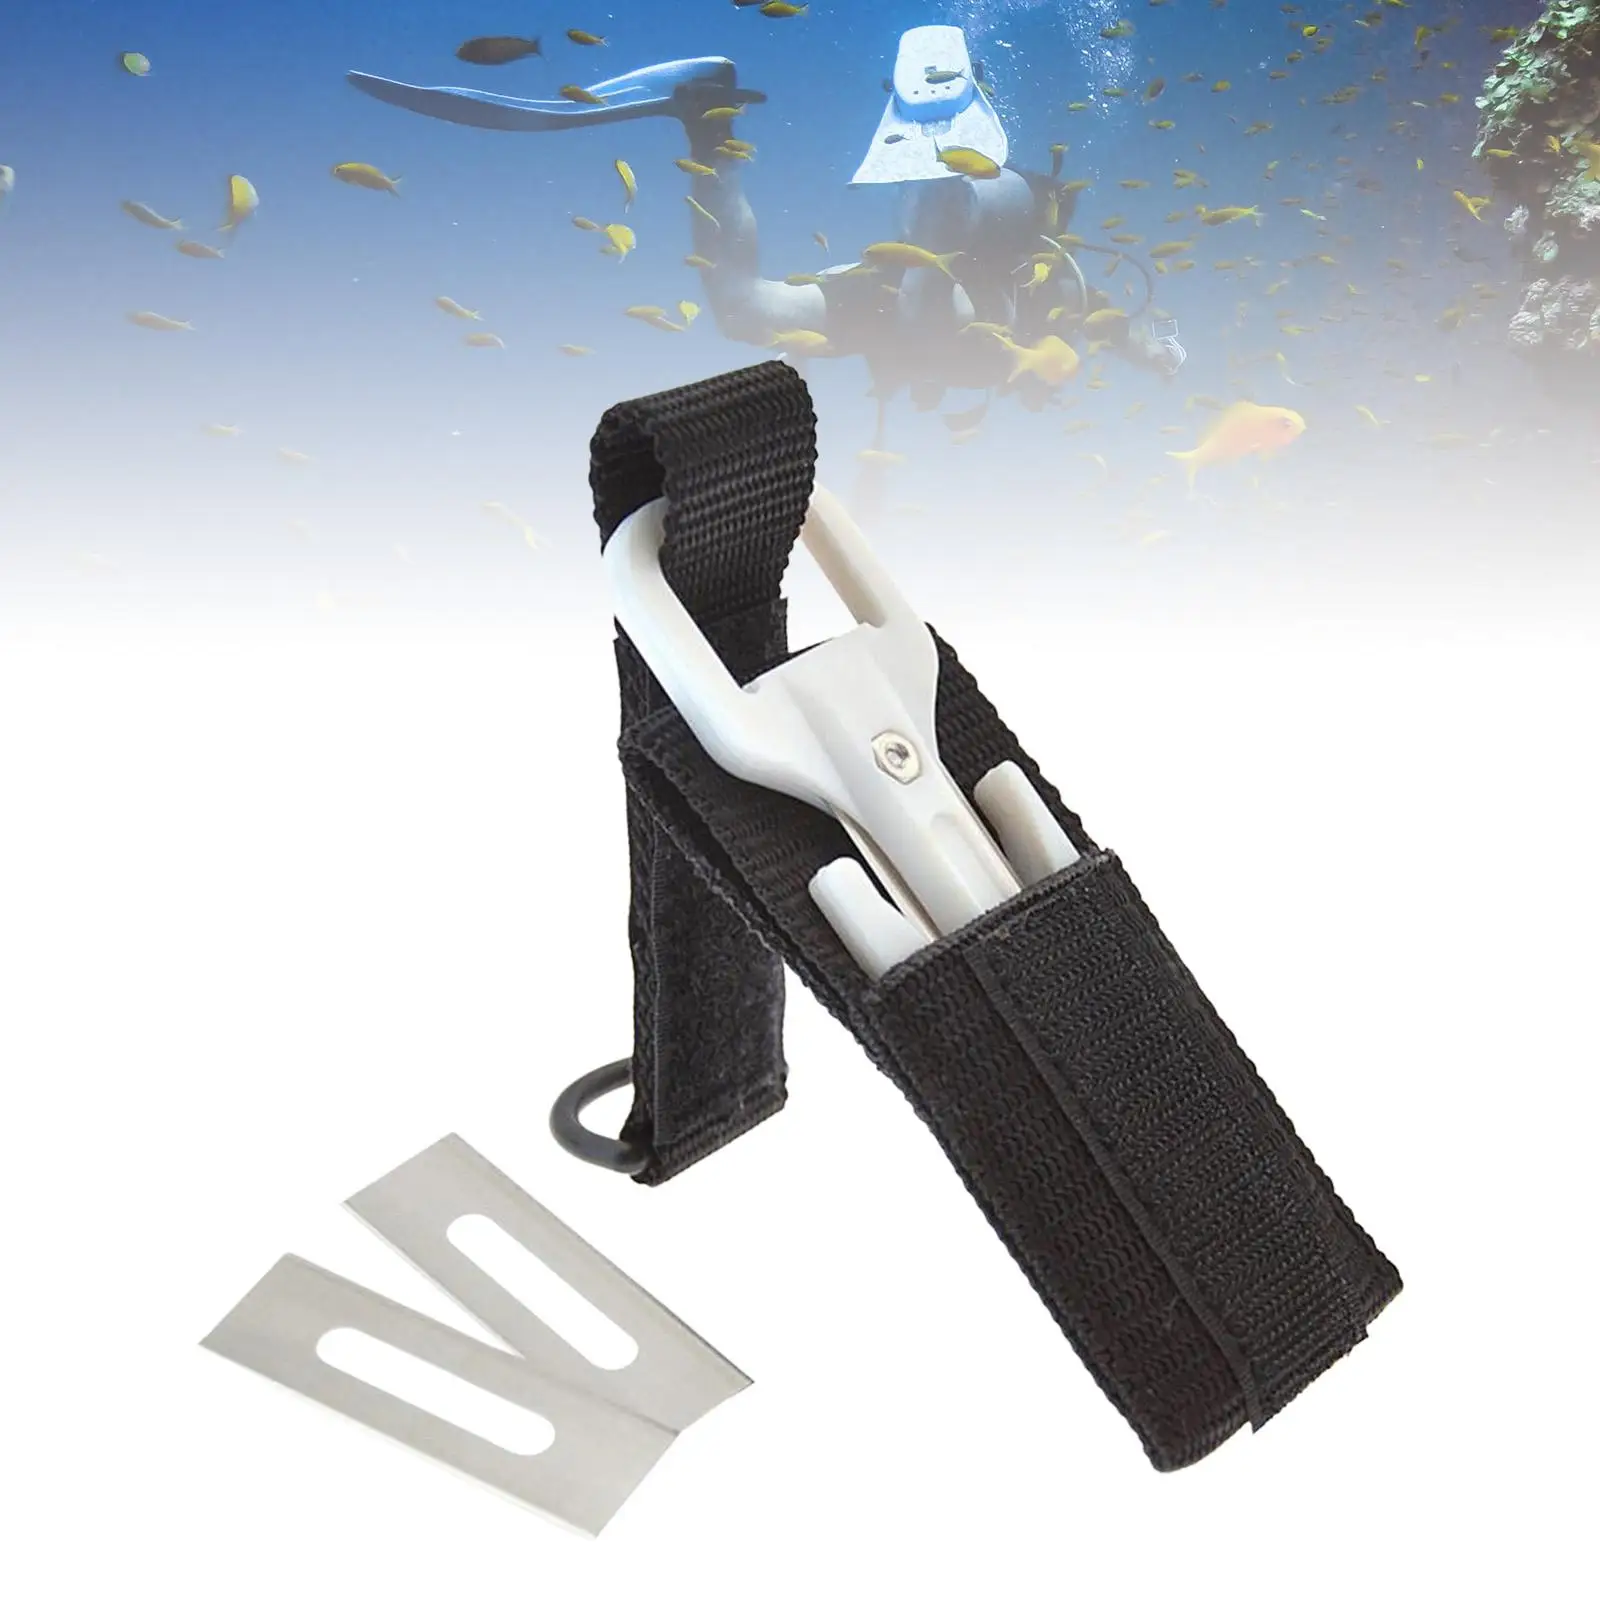 Scuba Dive Line Cutter Double Blade with Sheath Snorkeling Knives for Freediving Spearfishing Diving Fishing Net Fishing Line